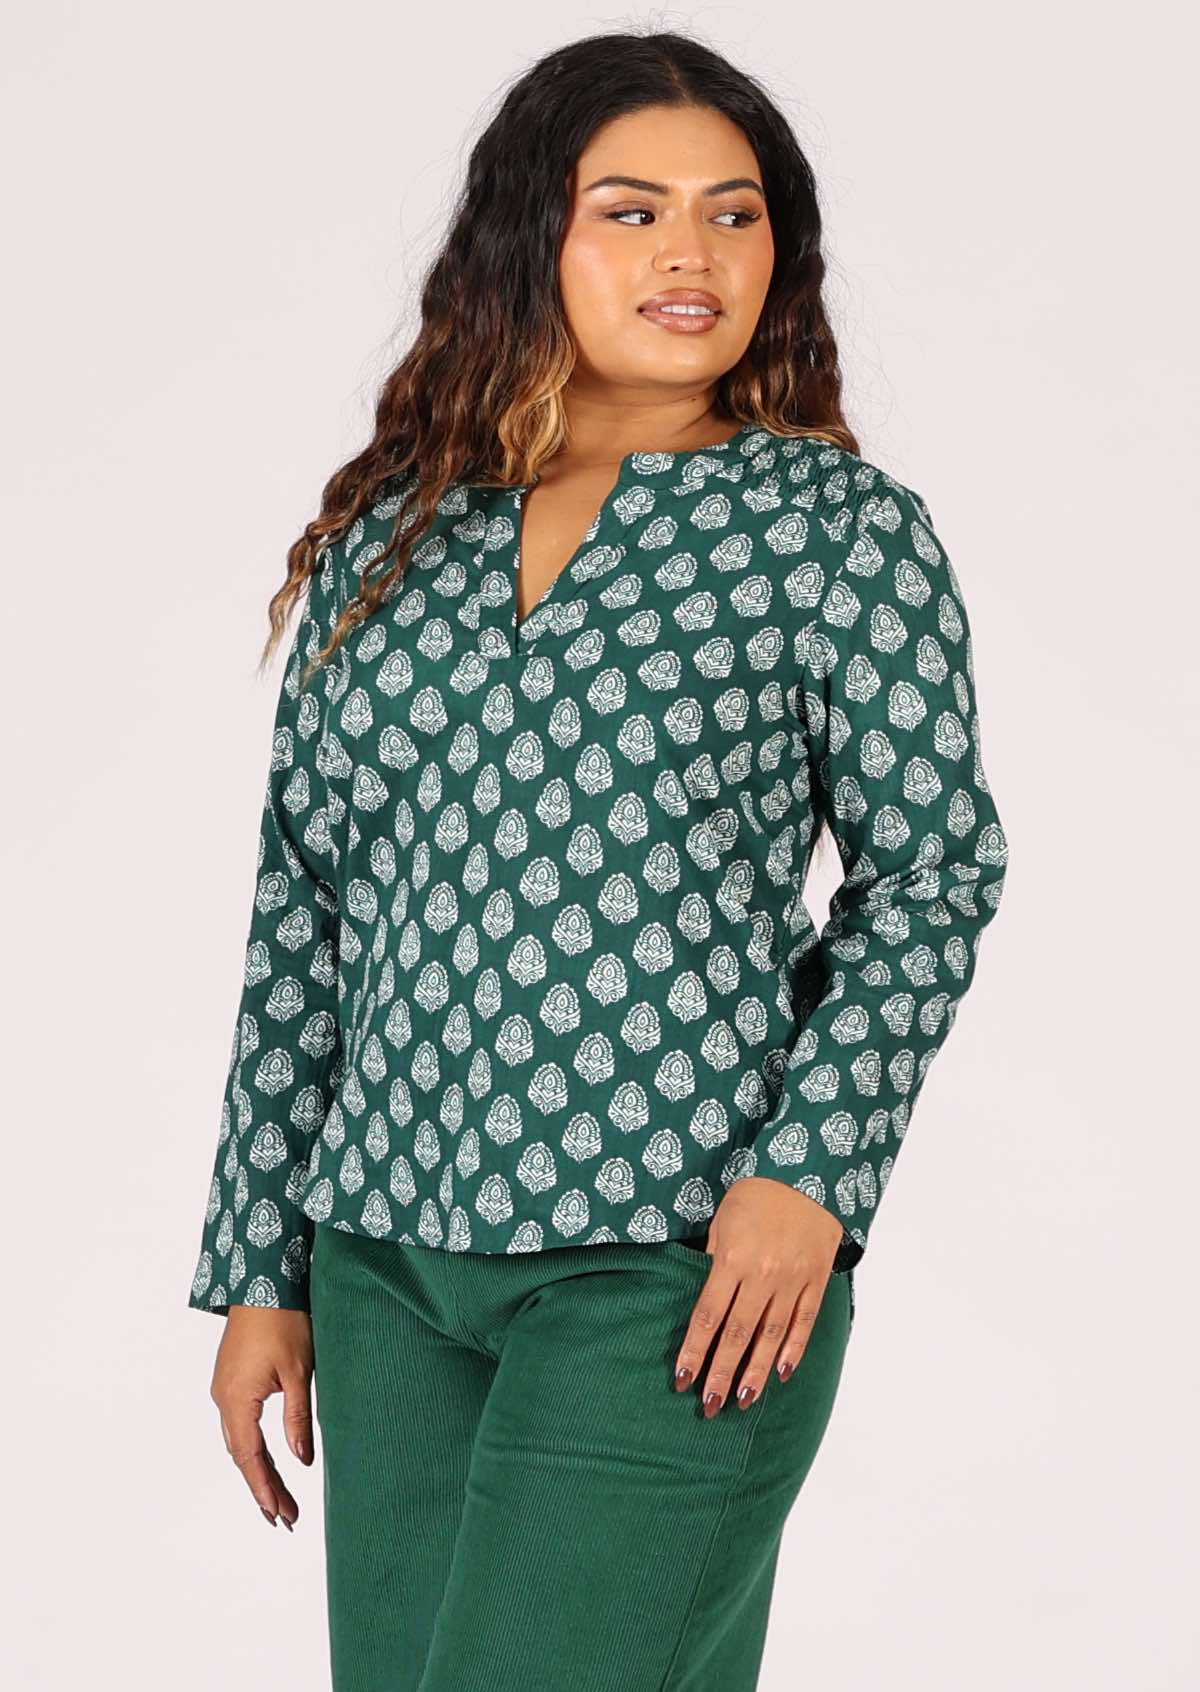 Long sleeve cotton top with pendant print on a dark green base